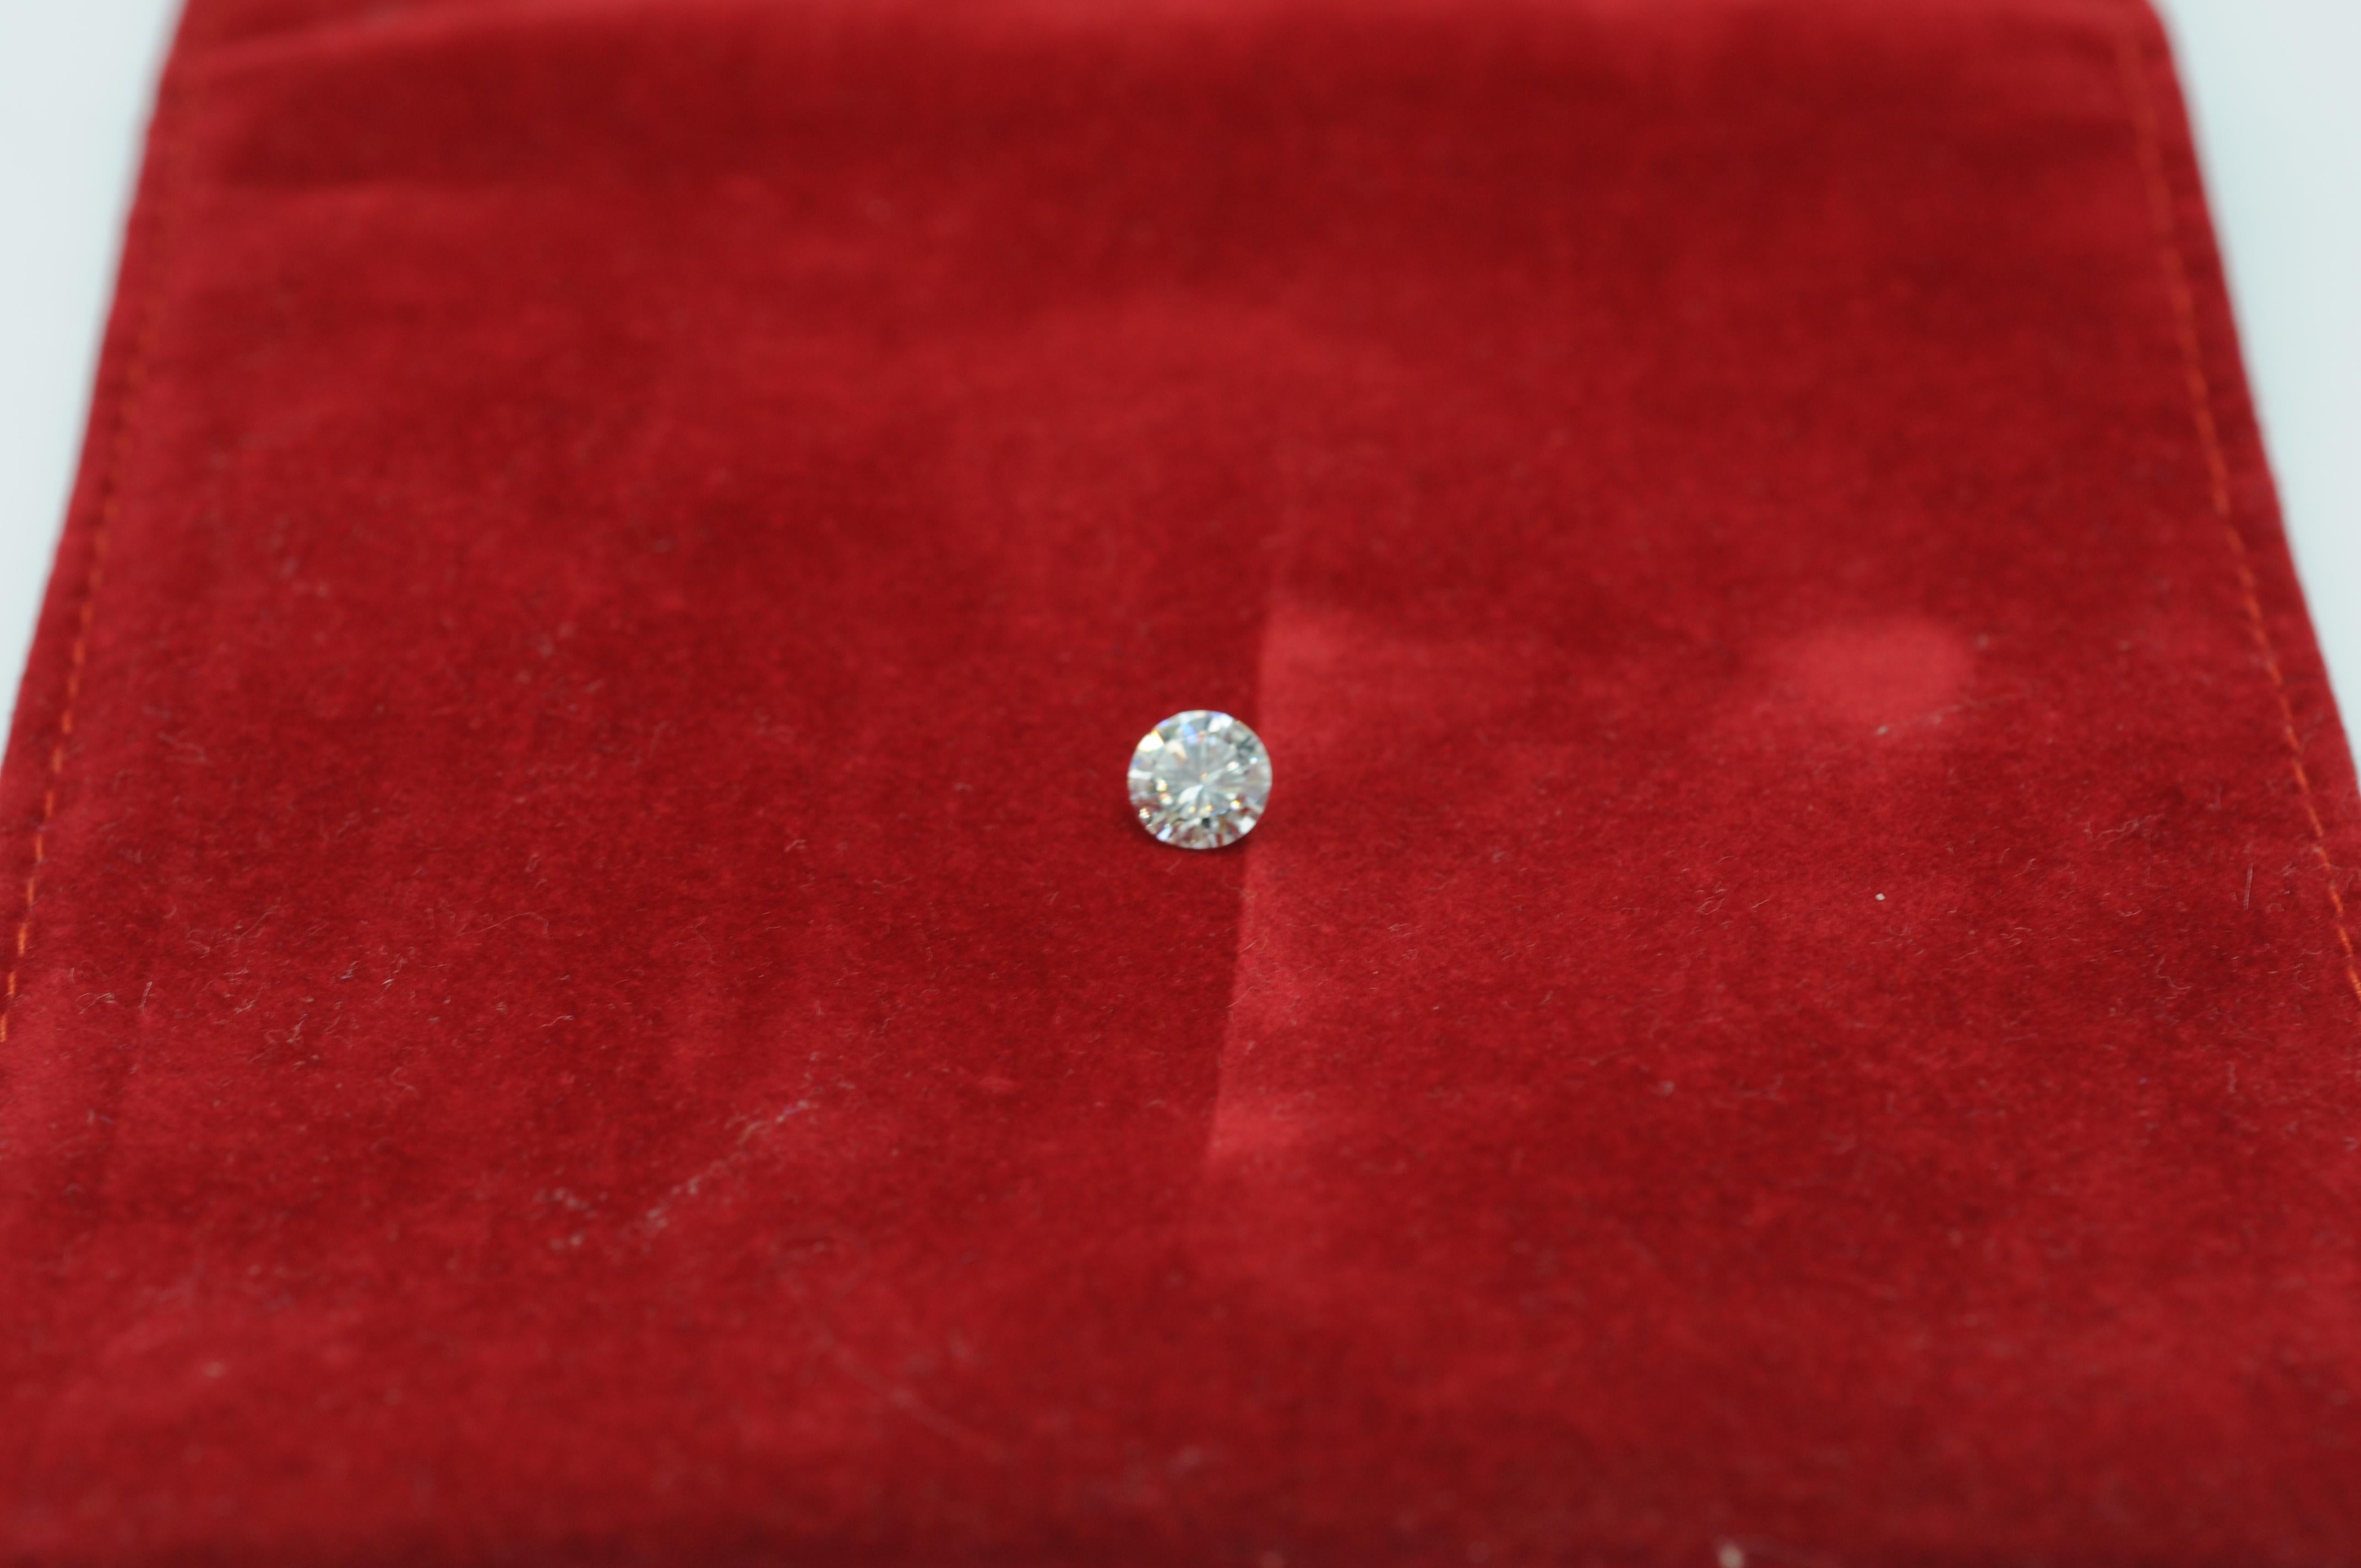  Diamond clarity:(IF) internally flawless color: top wesselton 1.06ct For Sale 3